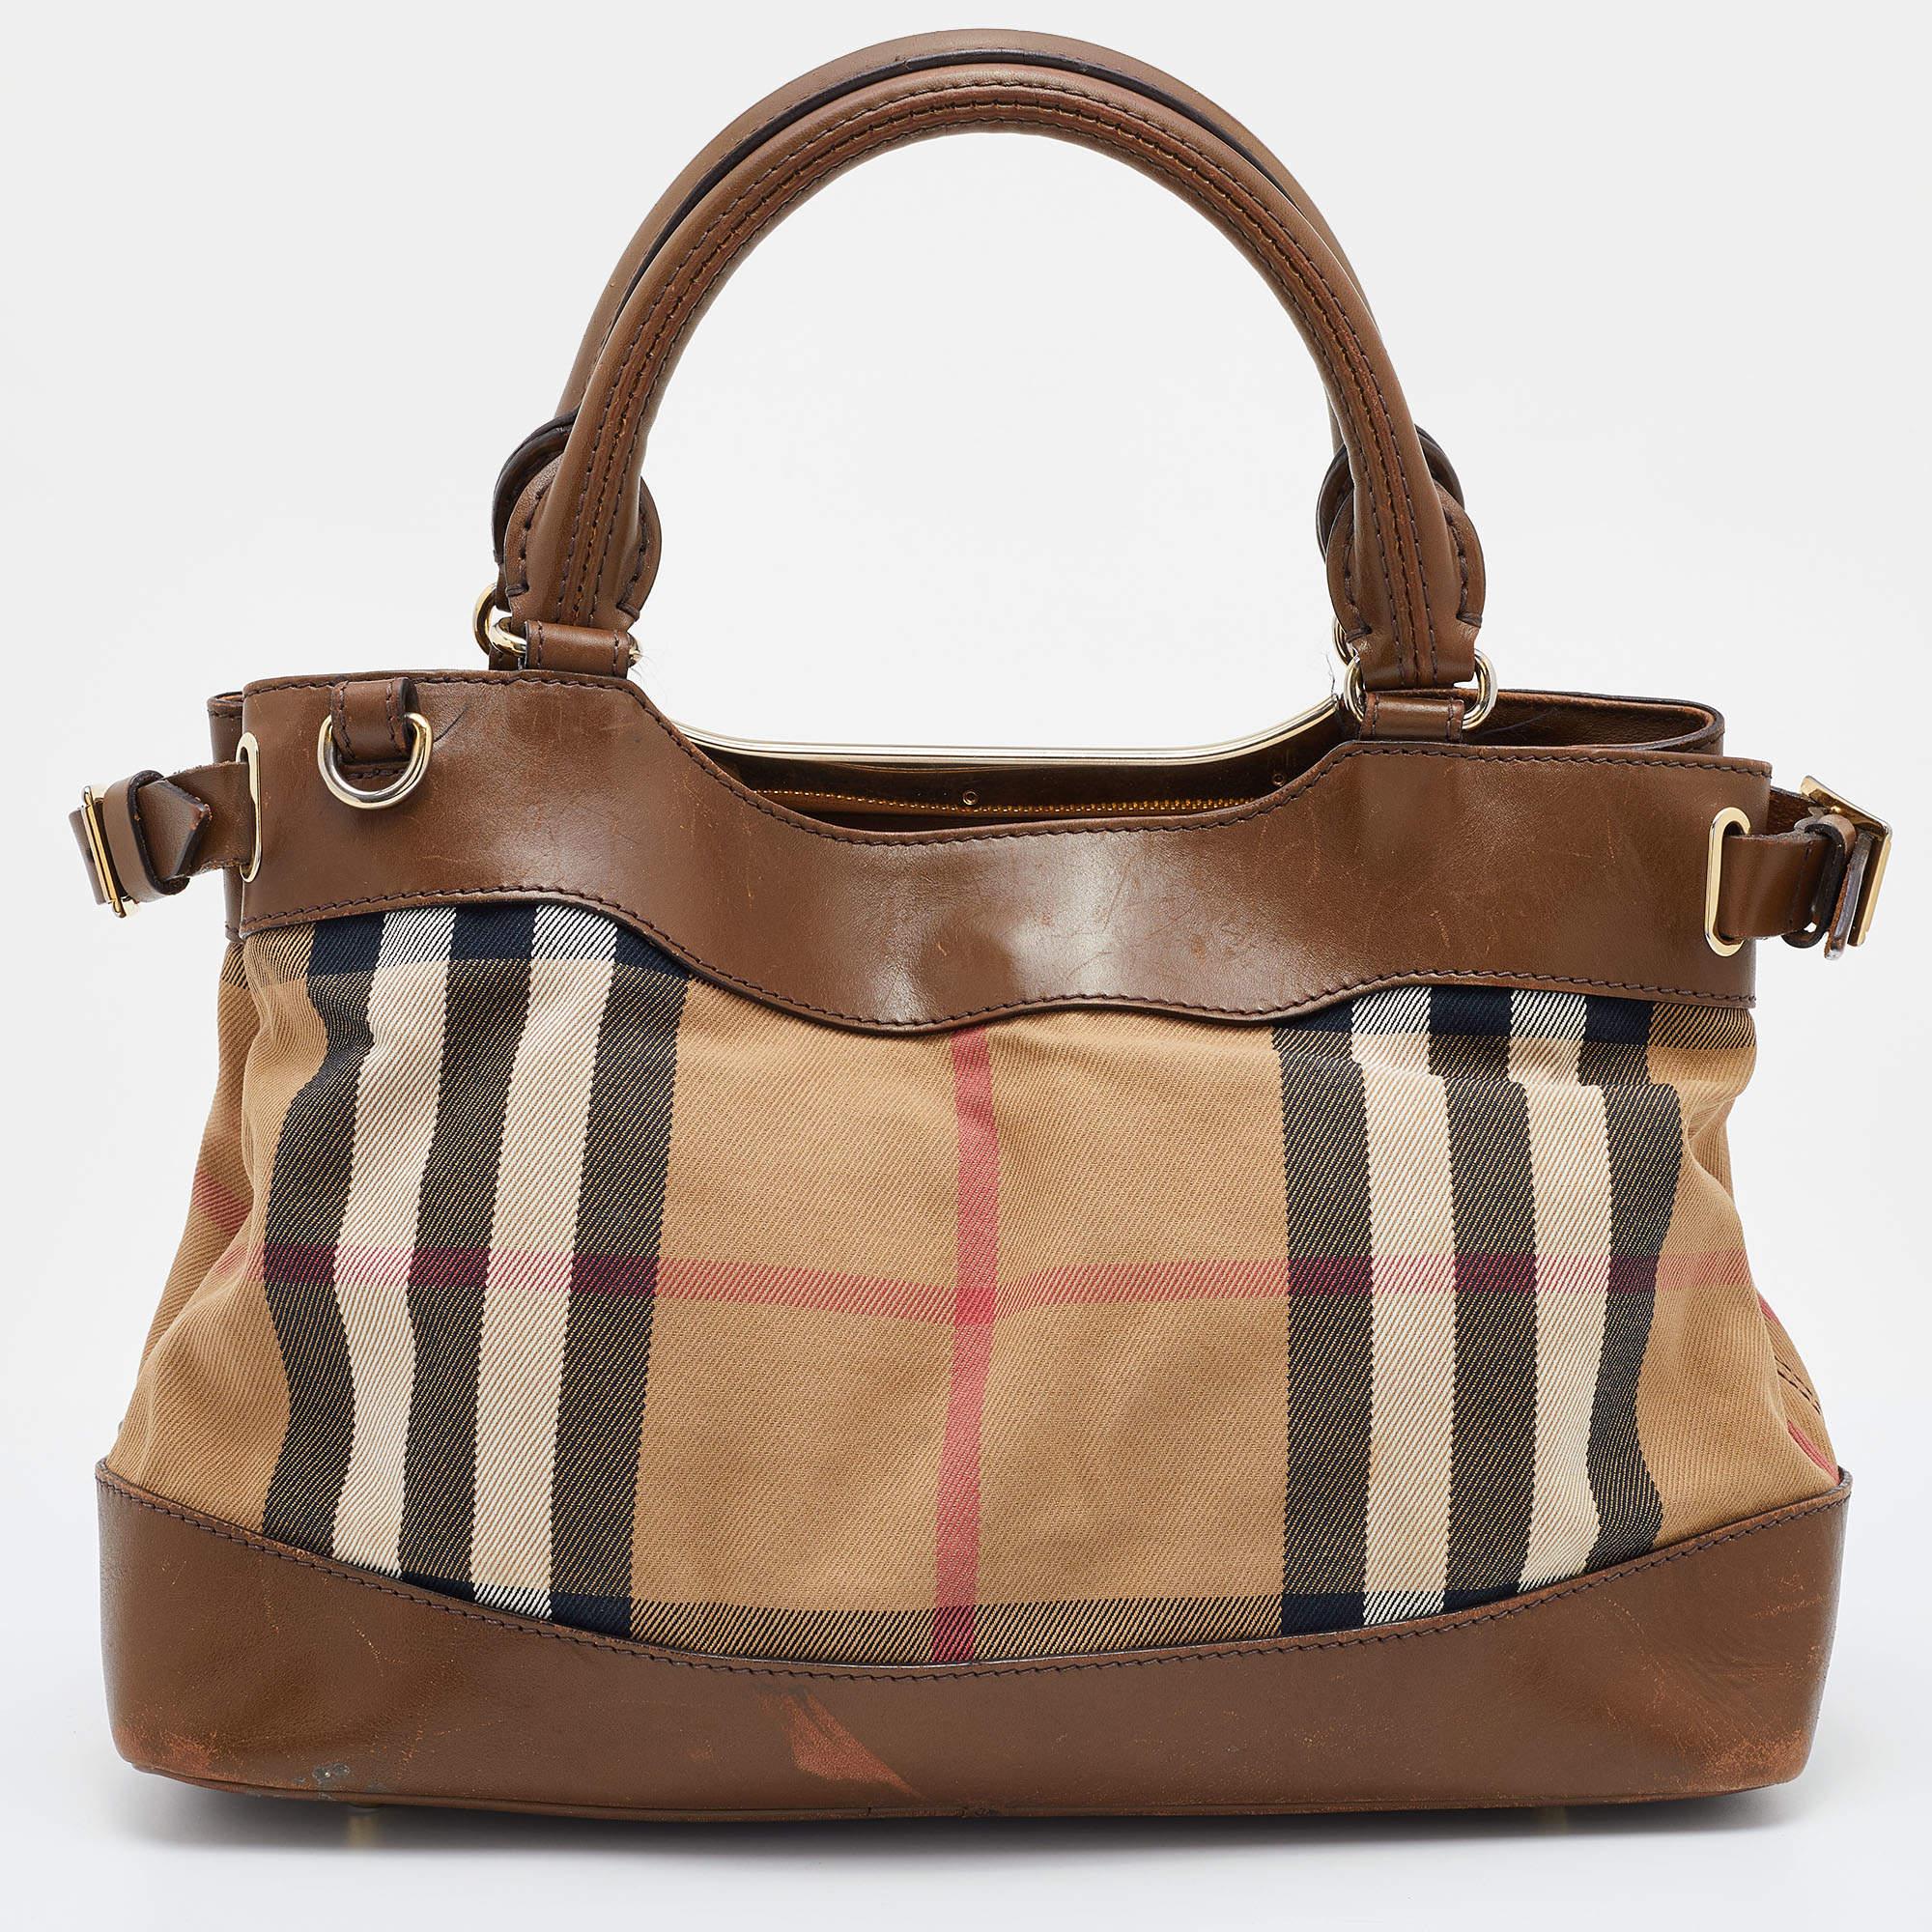 Expertly crafted and skillfully designed, this Burberry creation is a must-have in every bag collection. It is made from a mix of Nova check canvas and leather. Features like a shoulder strap, top handles, and spacious interior make it a practical